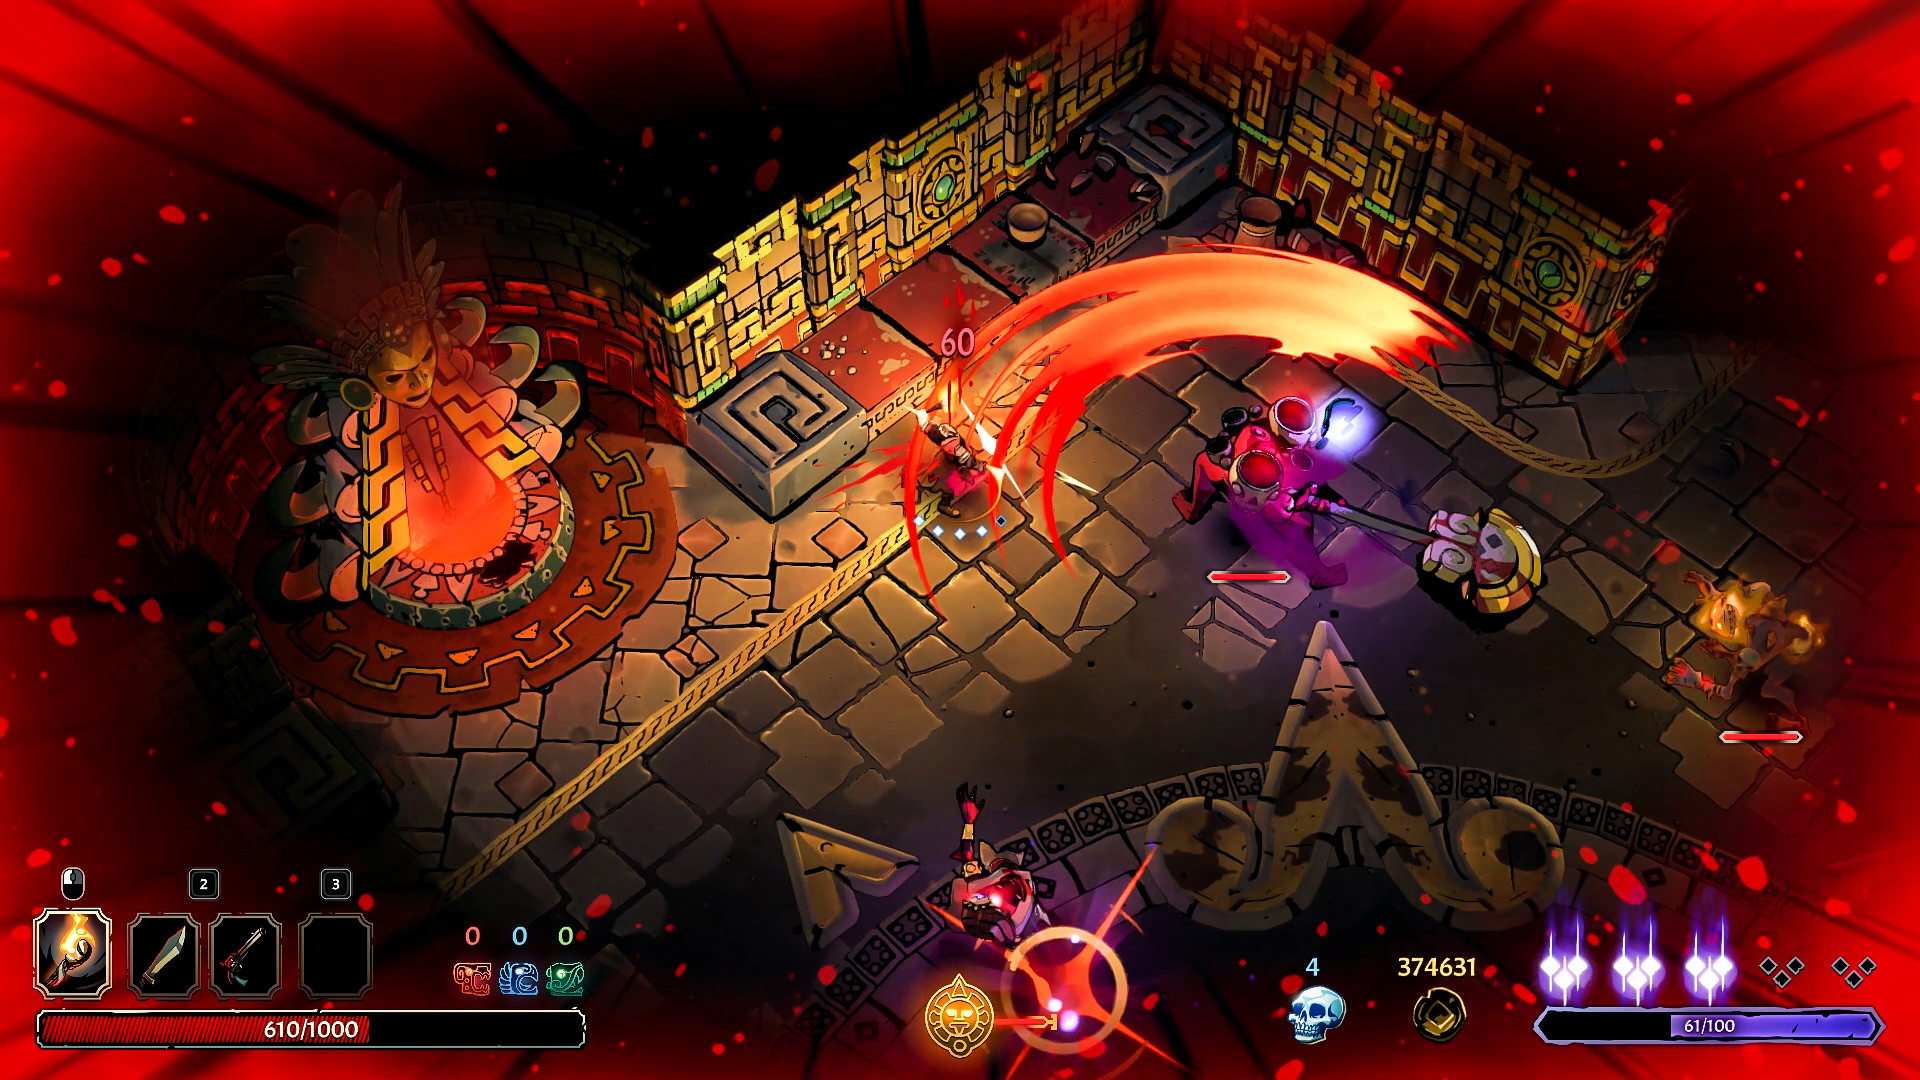 Curse of the Dead Gods download the new for windows